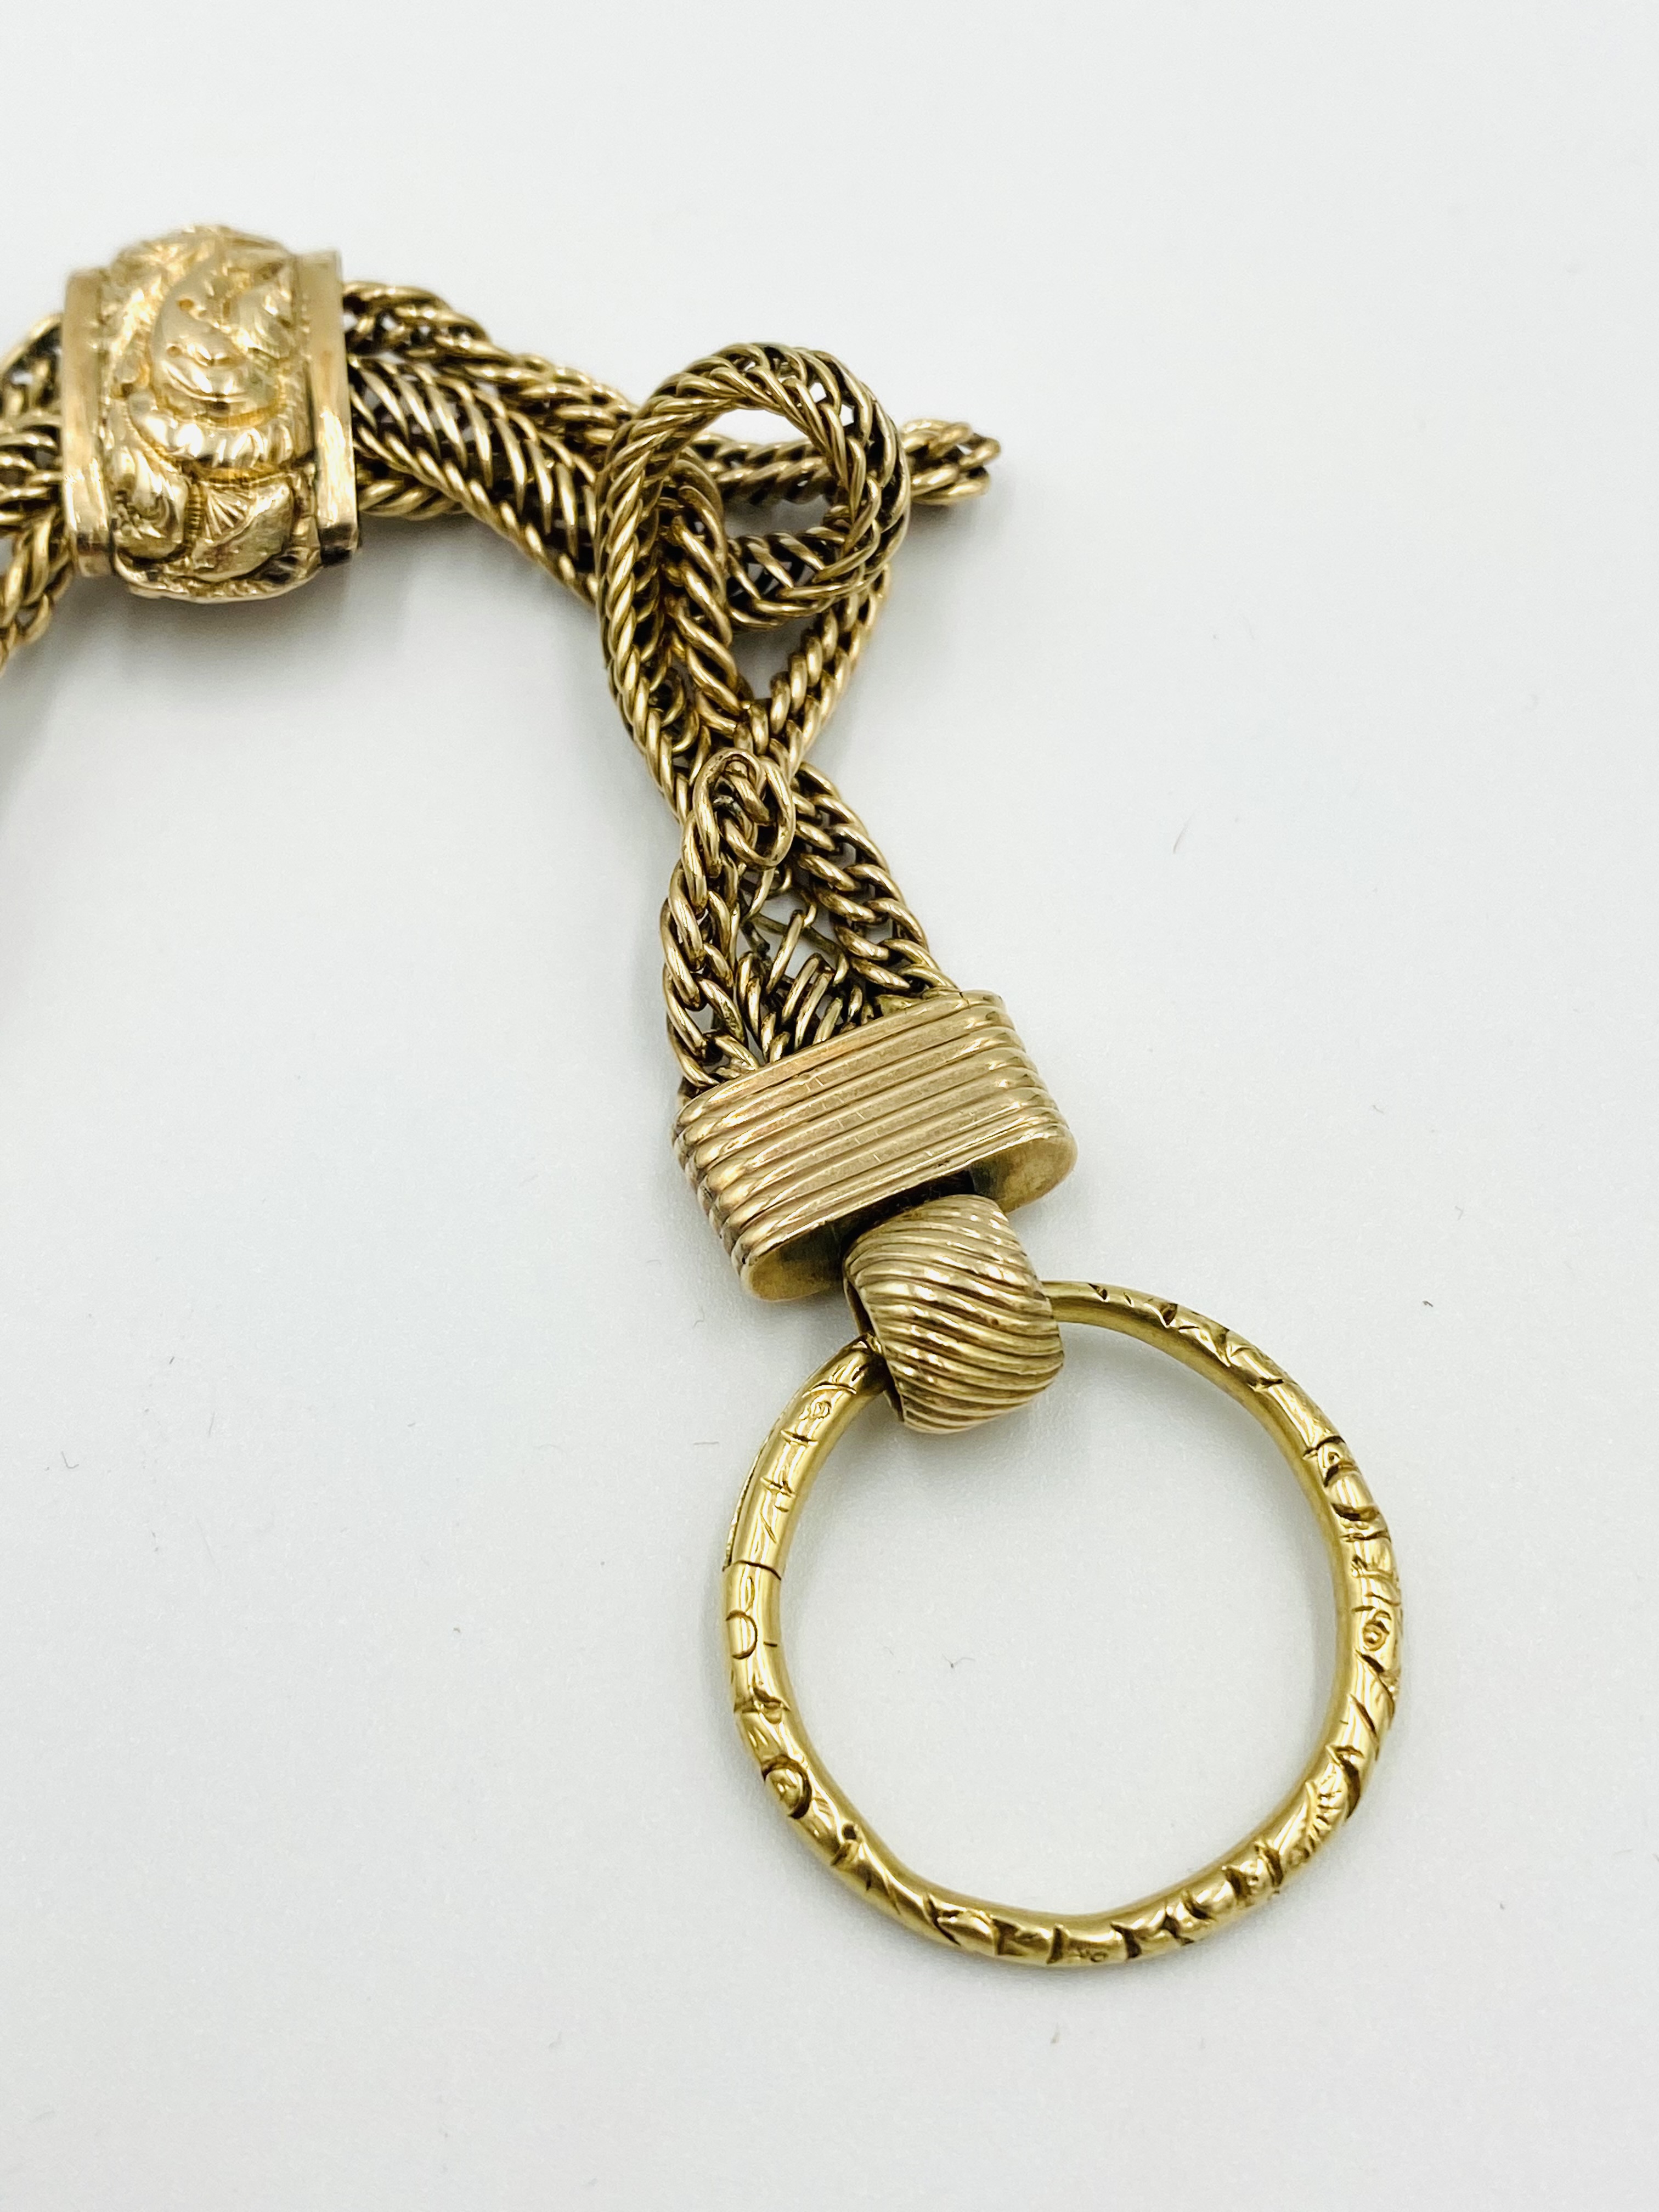 Gold fob chain with two seals - Image 4 of 8